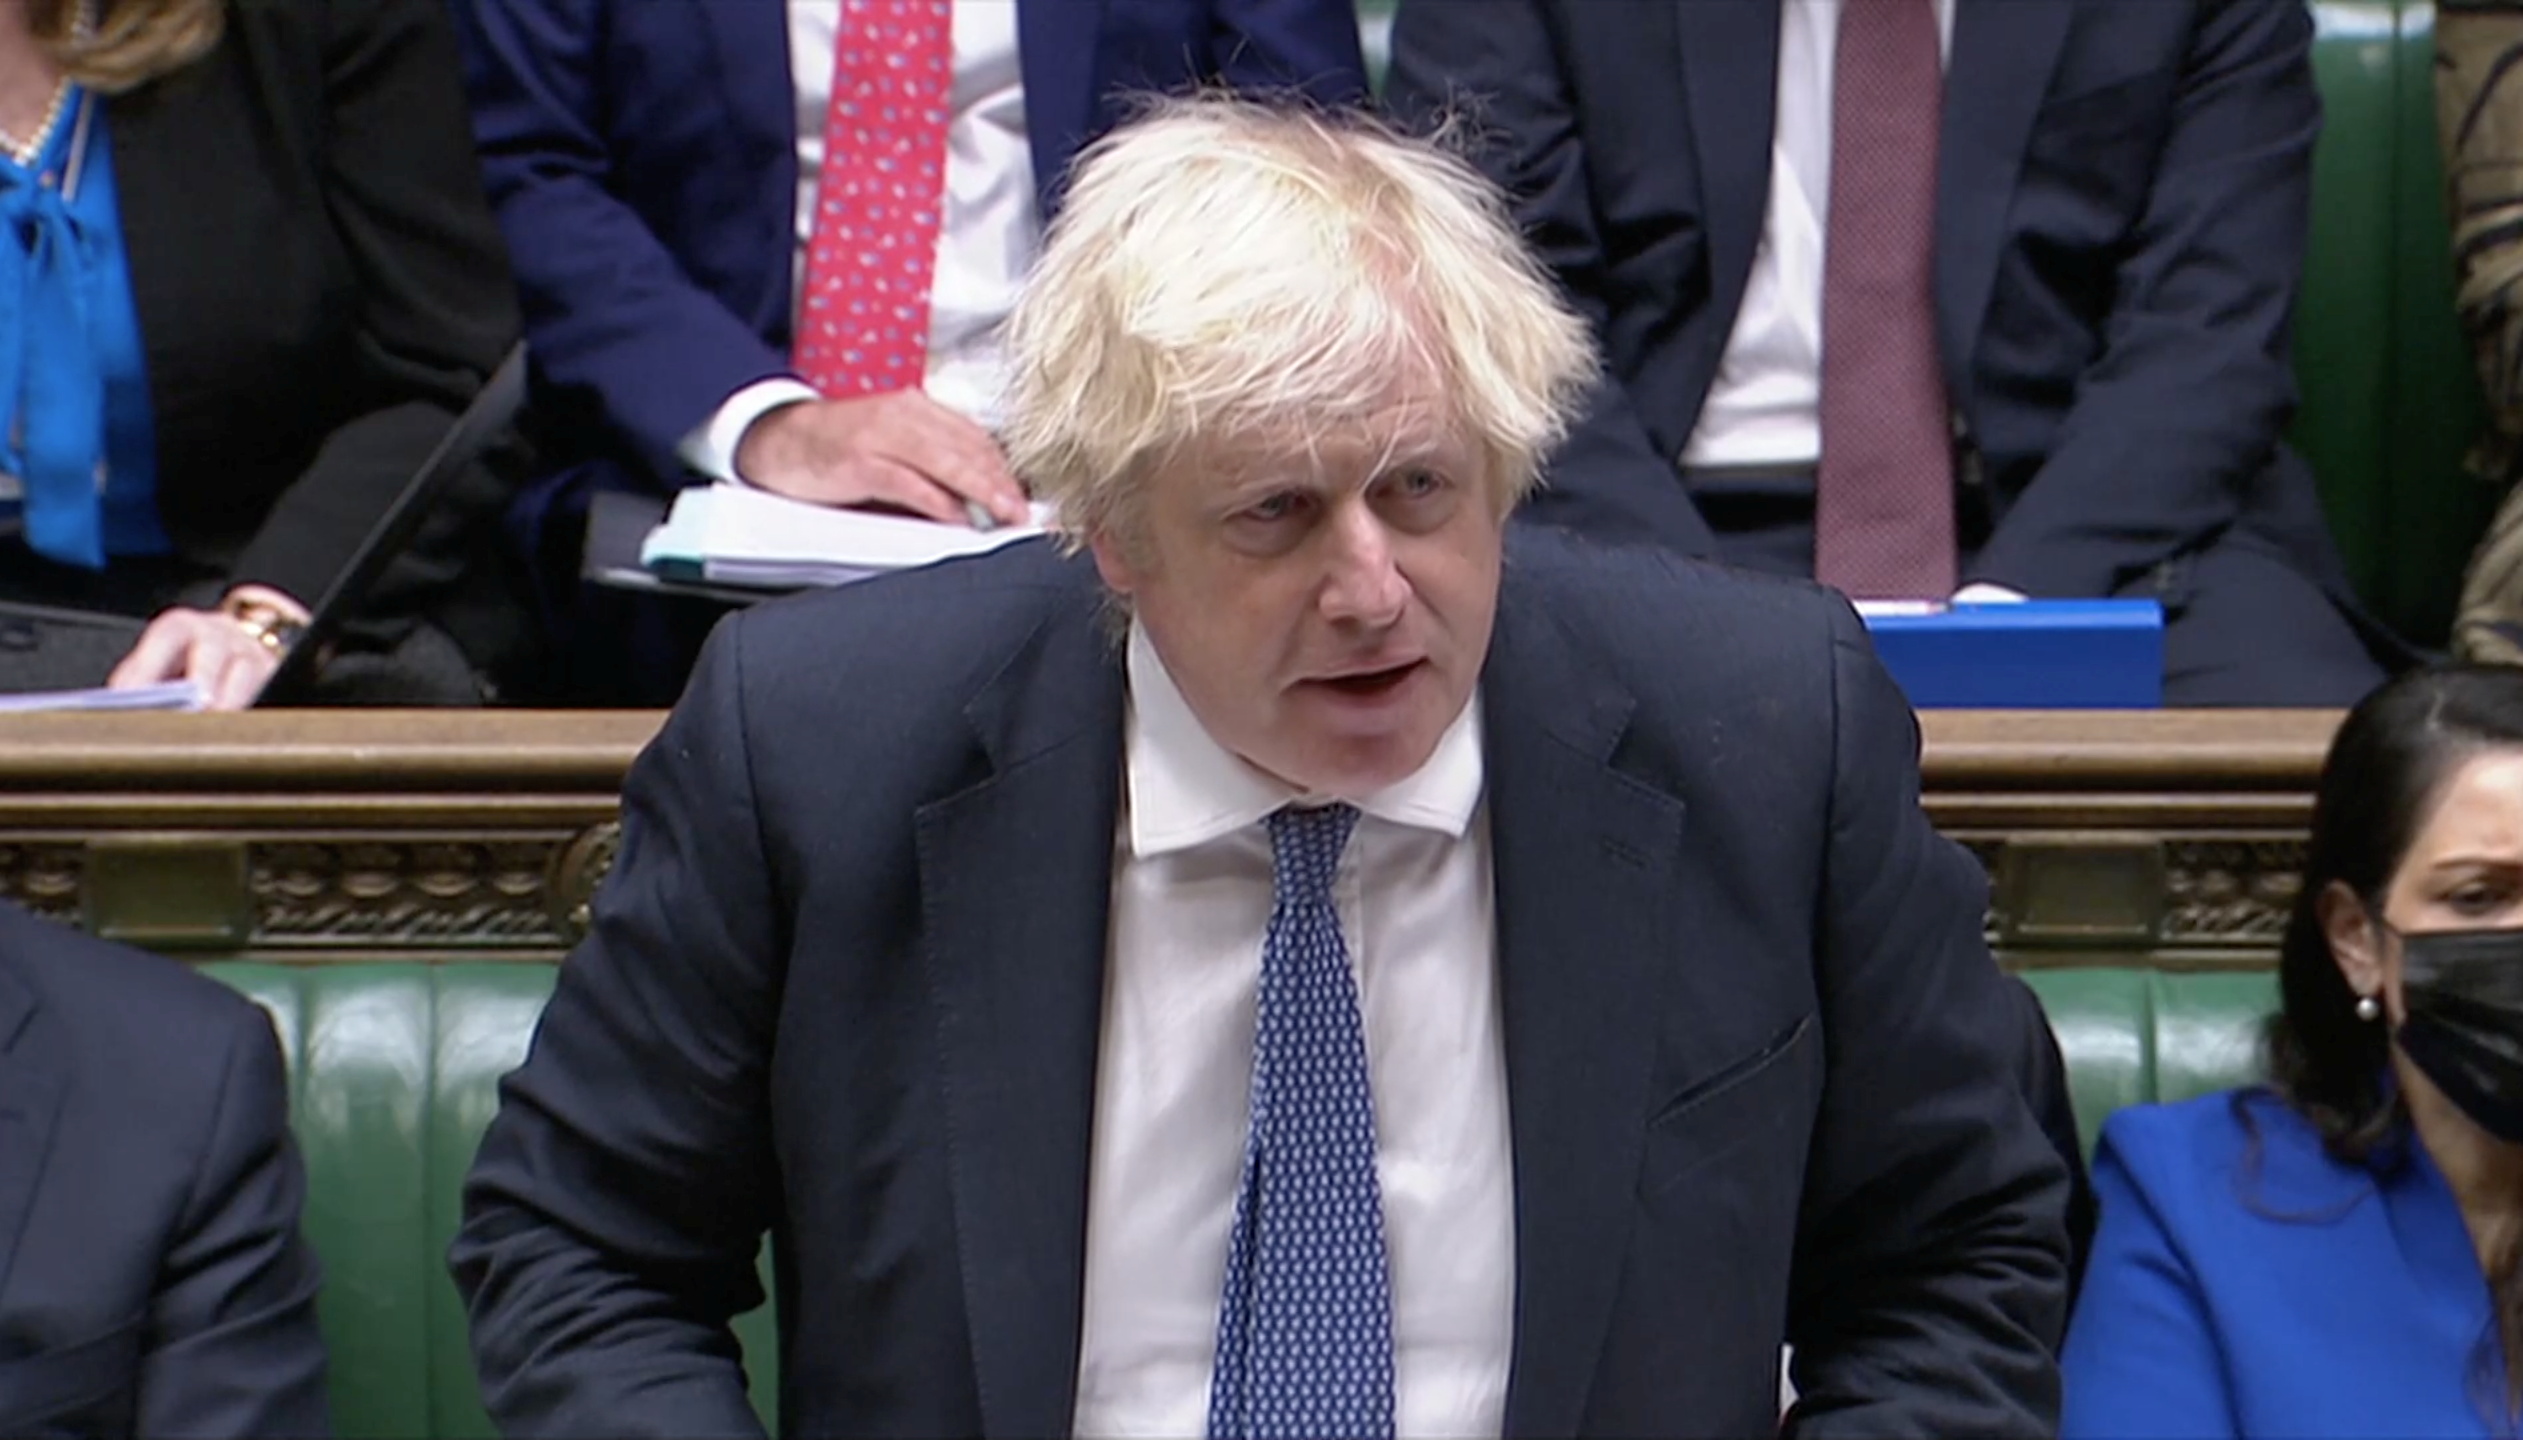 Britain's Prime Minister Boris Johnson speaks during the weekly question time debate at Parliament in London, Britain, December 8, 2021, in this screen grab taken from video. Reuters TV via REUTERS THIS IMAGE HAS BEEN SUPPLIED BY A THIRD PARTY. NEWS AND CURRENT AFFAIRS USE ONLY, CANNOT BE USED FOR LIGHT ENTERTAINMENT OR SATIRICAL PURPOSES, PARTY POLITICAL BROADCAST USAGE MUST BE CLEARED WITH PBU